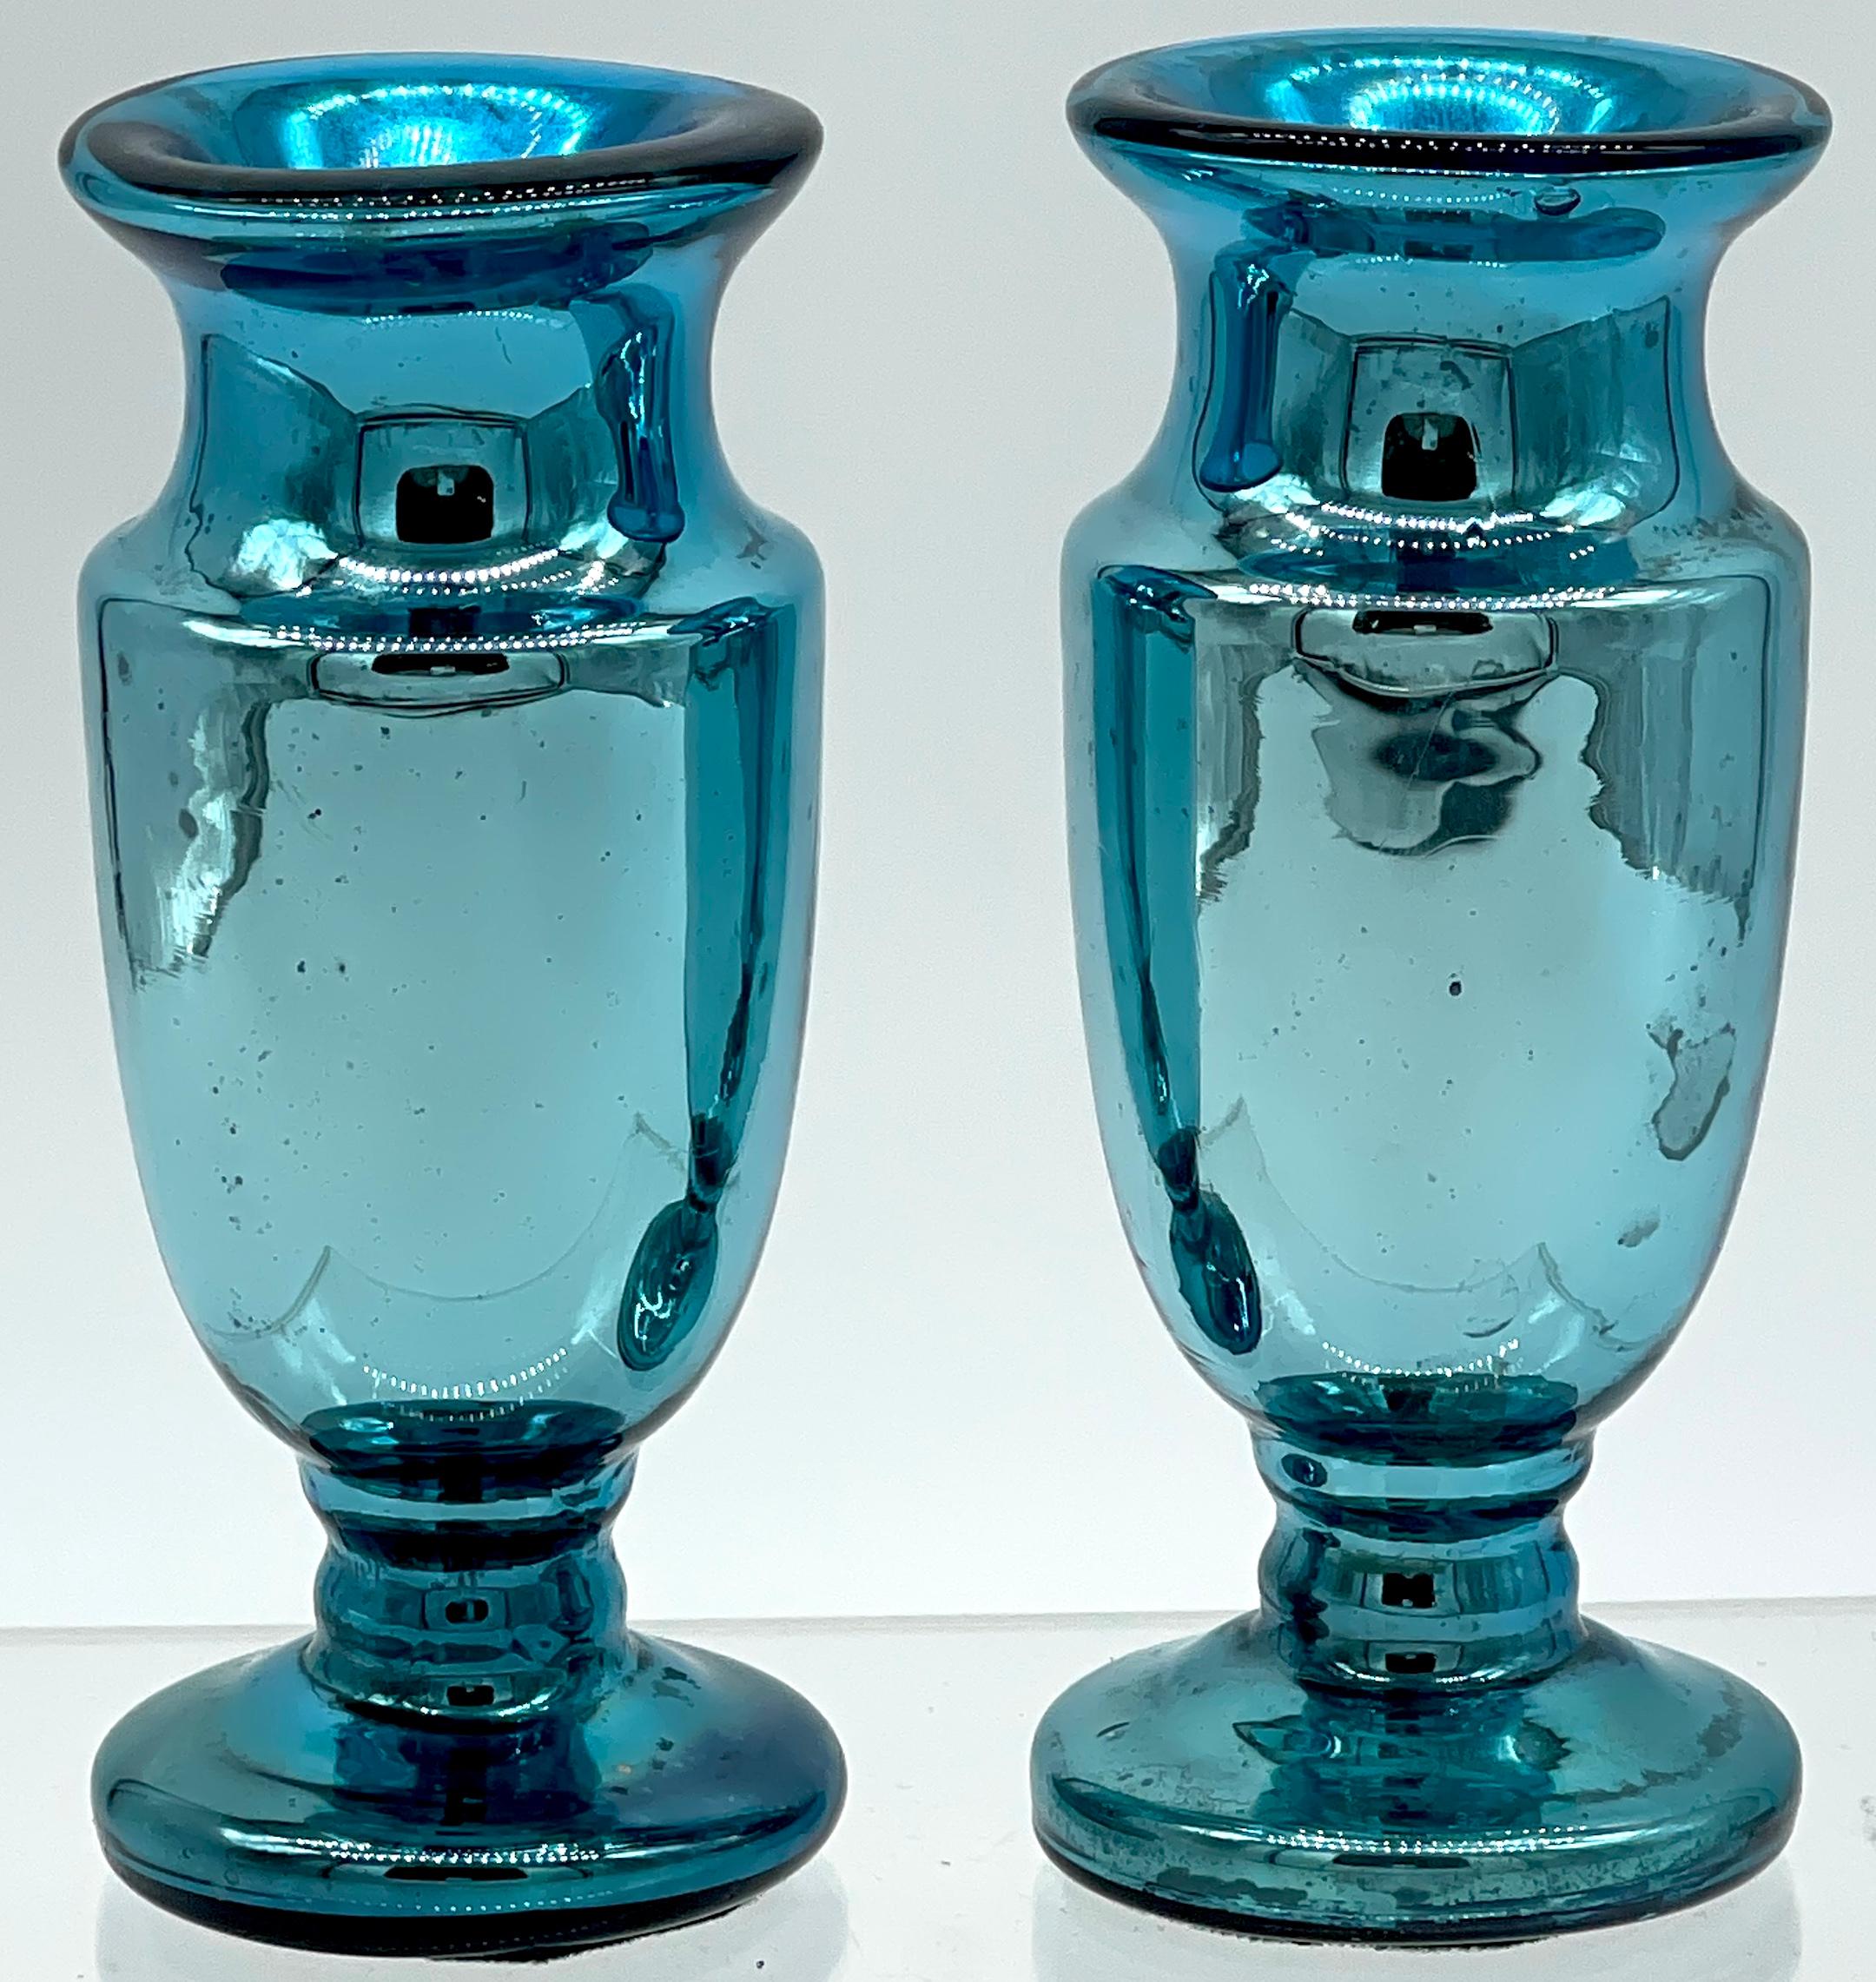 A Diminutive Pair of Ocean Blue Mercury Glass Vases
France, circa 1900s


A captivating pair of Ocean Blue Mercury Glass Vases, originating from France in the early 1900s. Each vase, a miniature tour de force, showcases the rarity of the 'Ocean